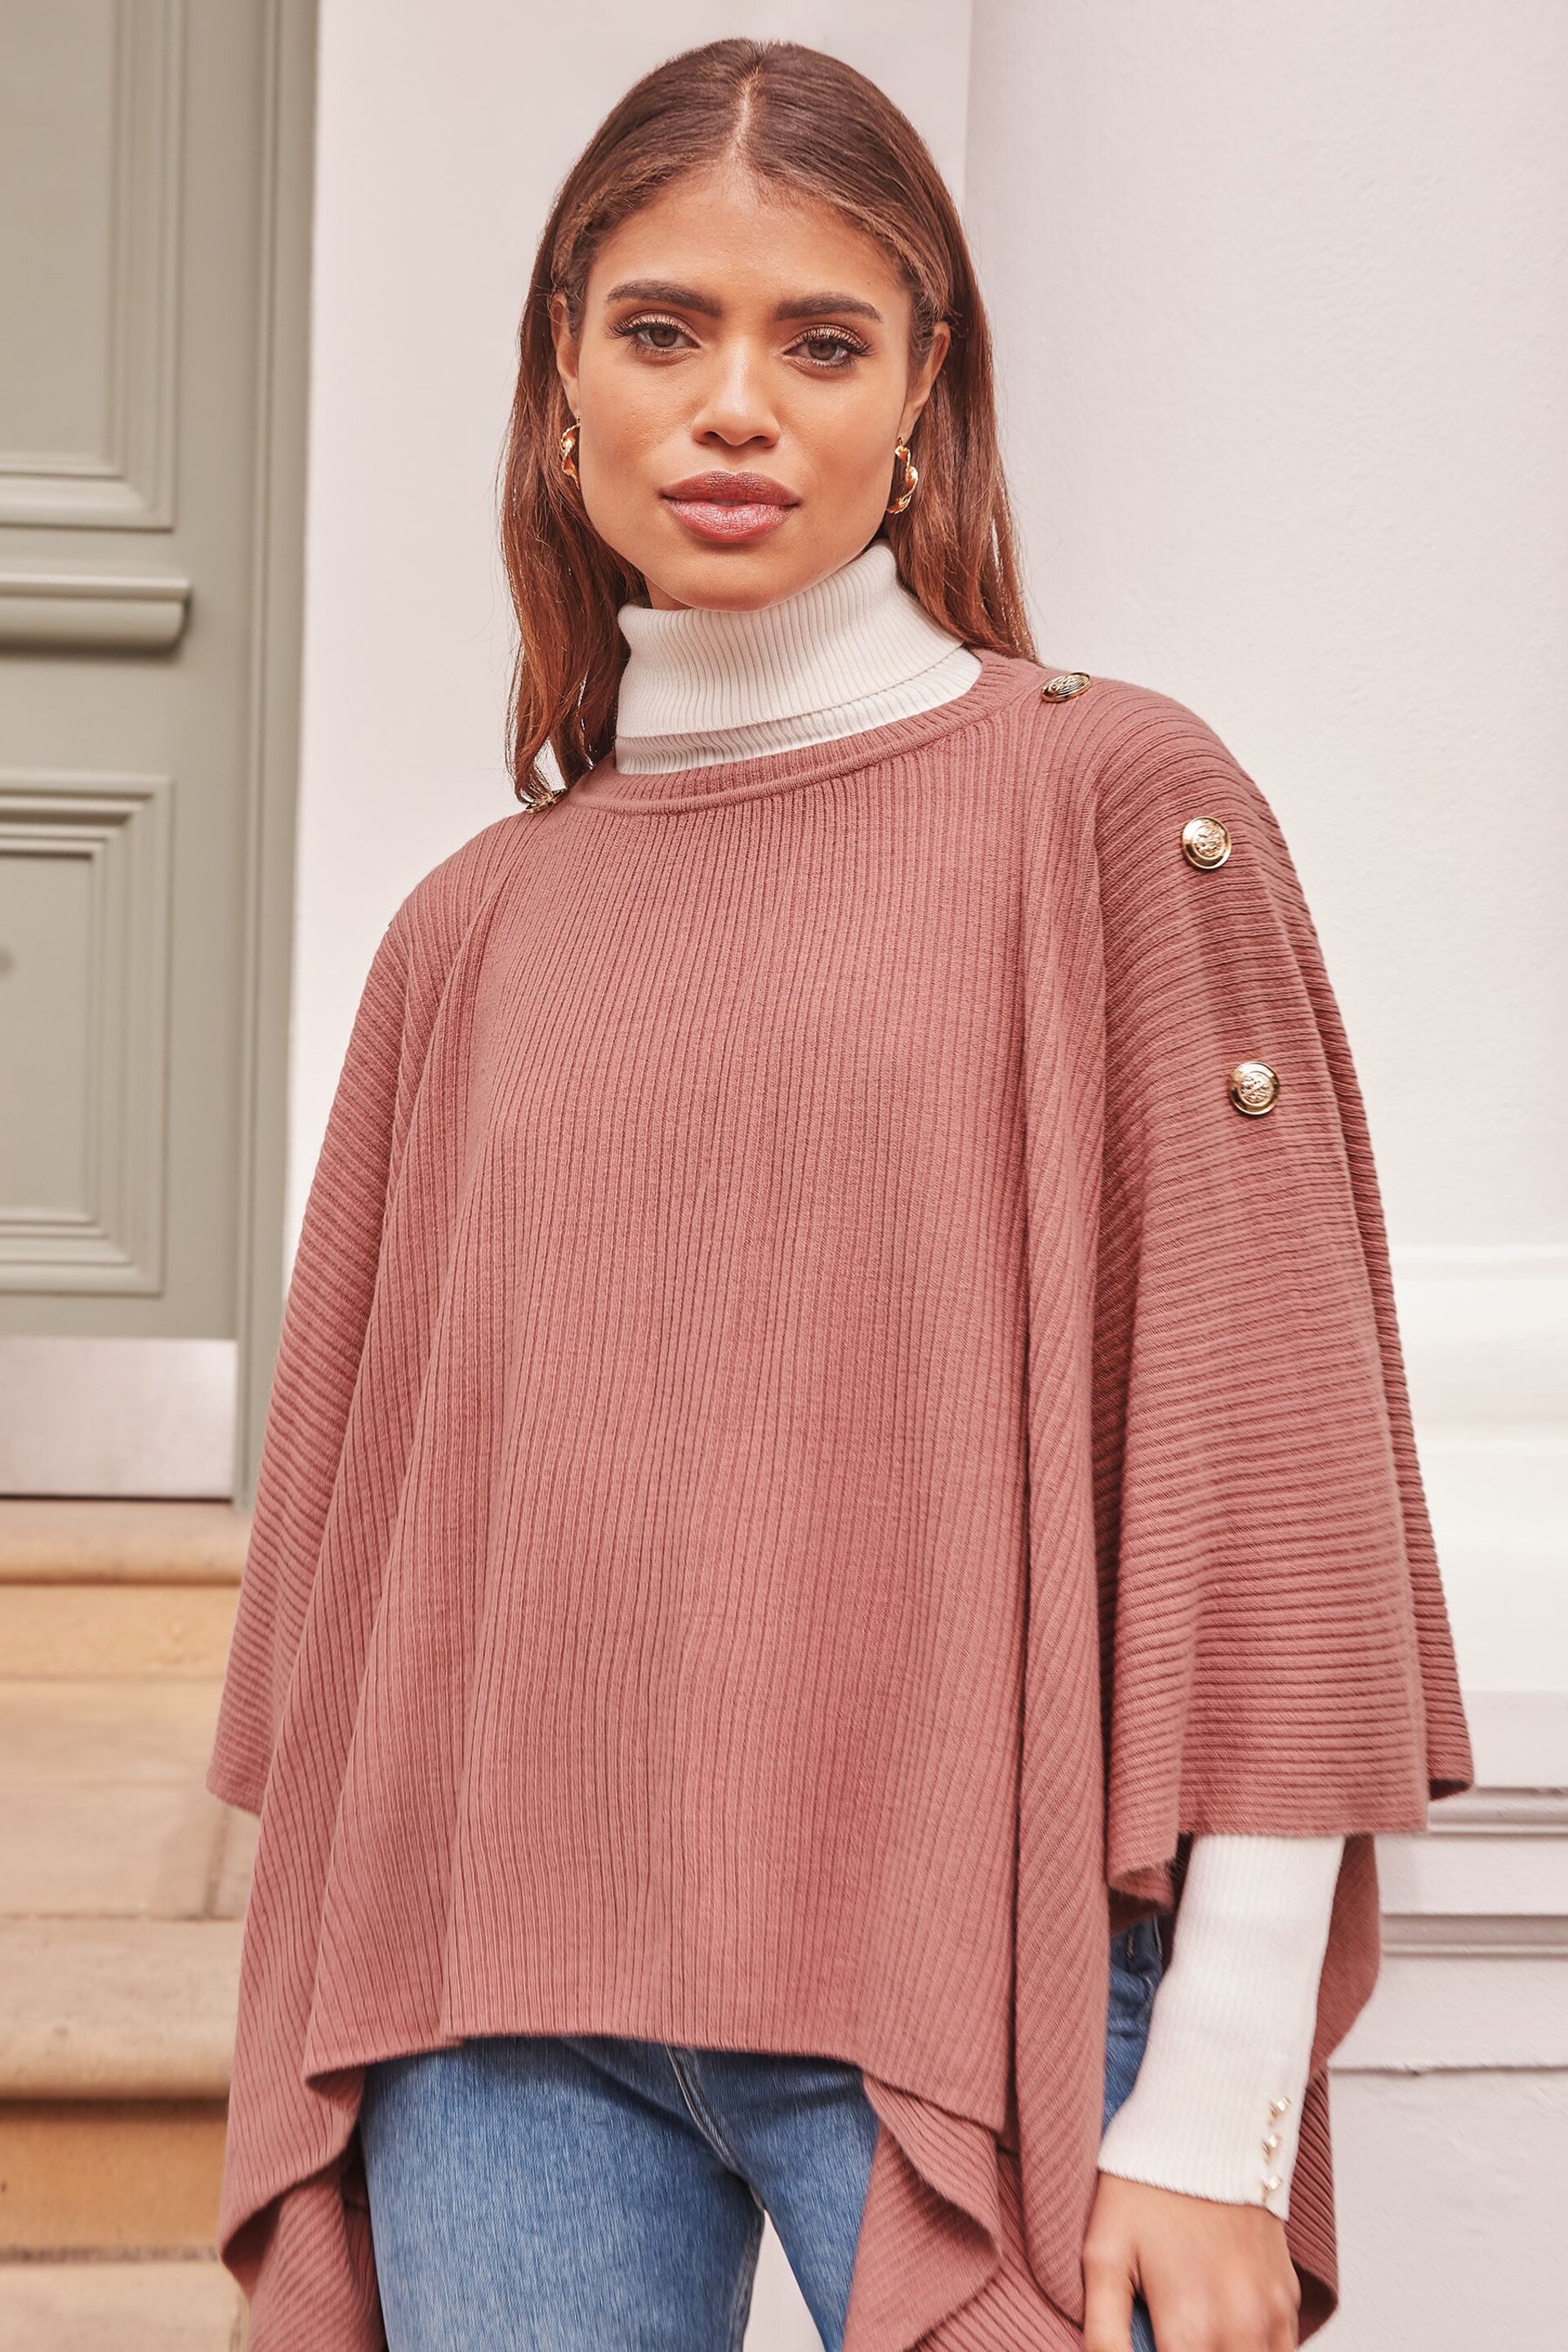 Lipsy Pink Military Button Shoulder Knit Poncho - Image 1 of 3